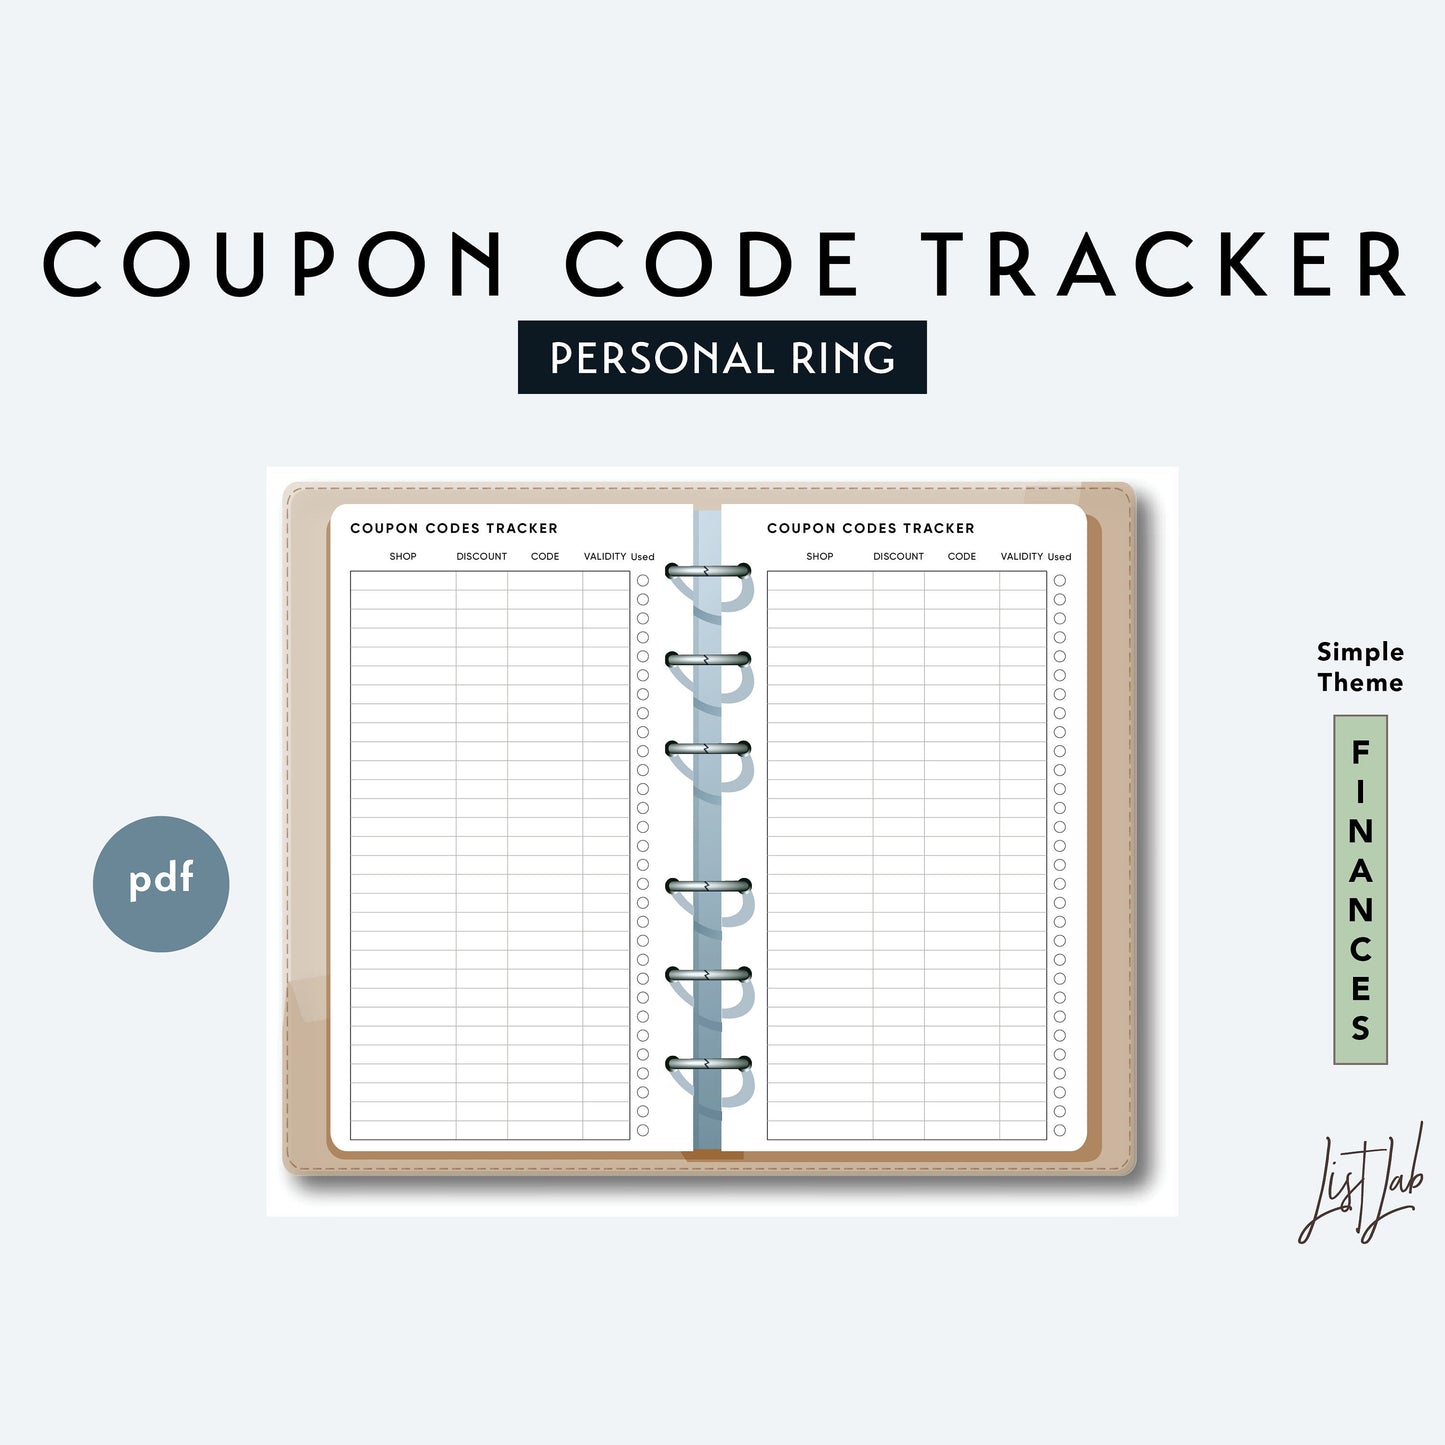 Personal Ring COUPON CODE TRACKER Printable Insert Set